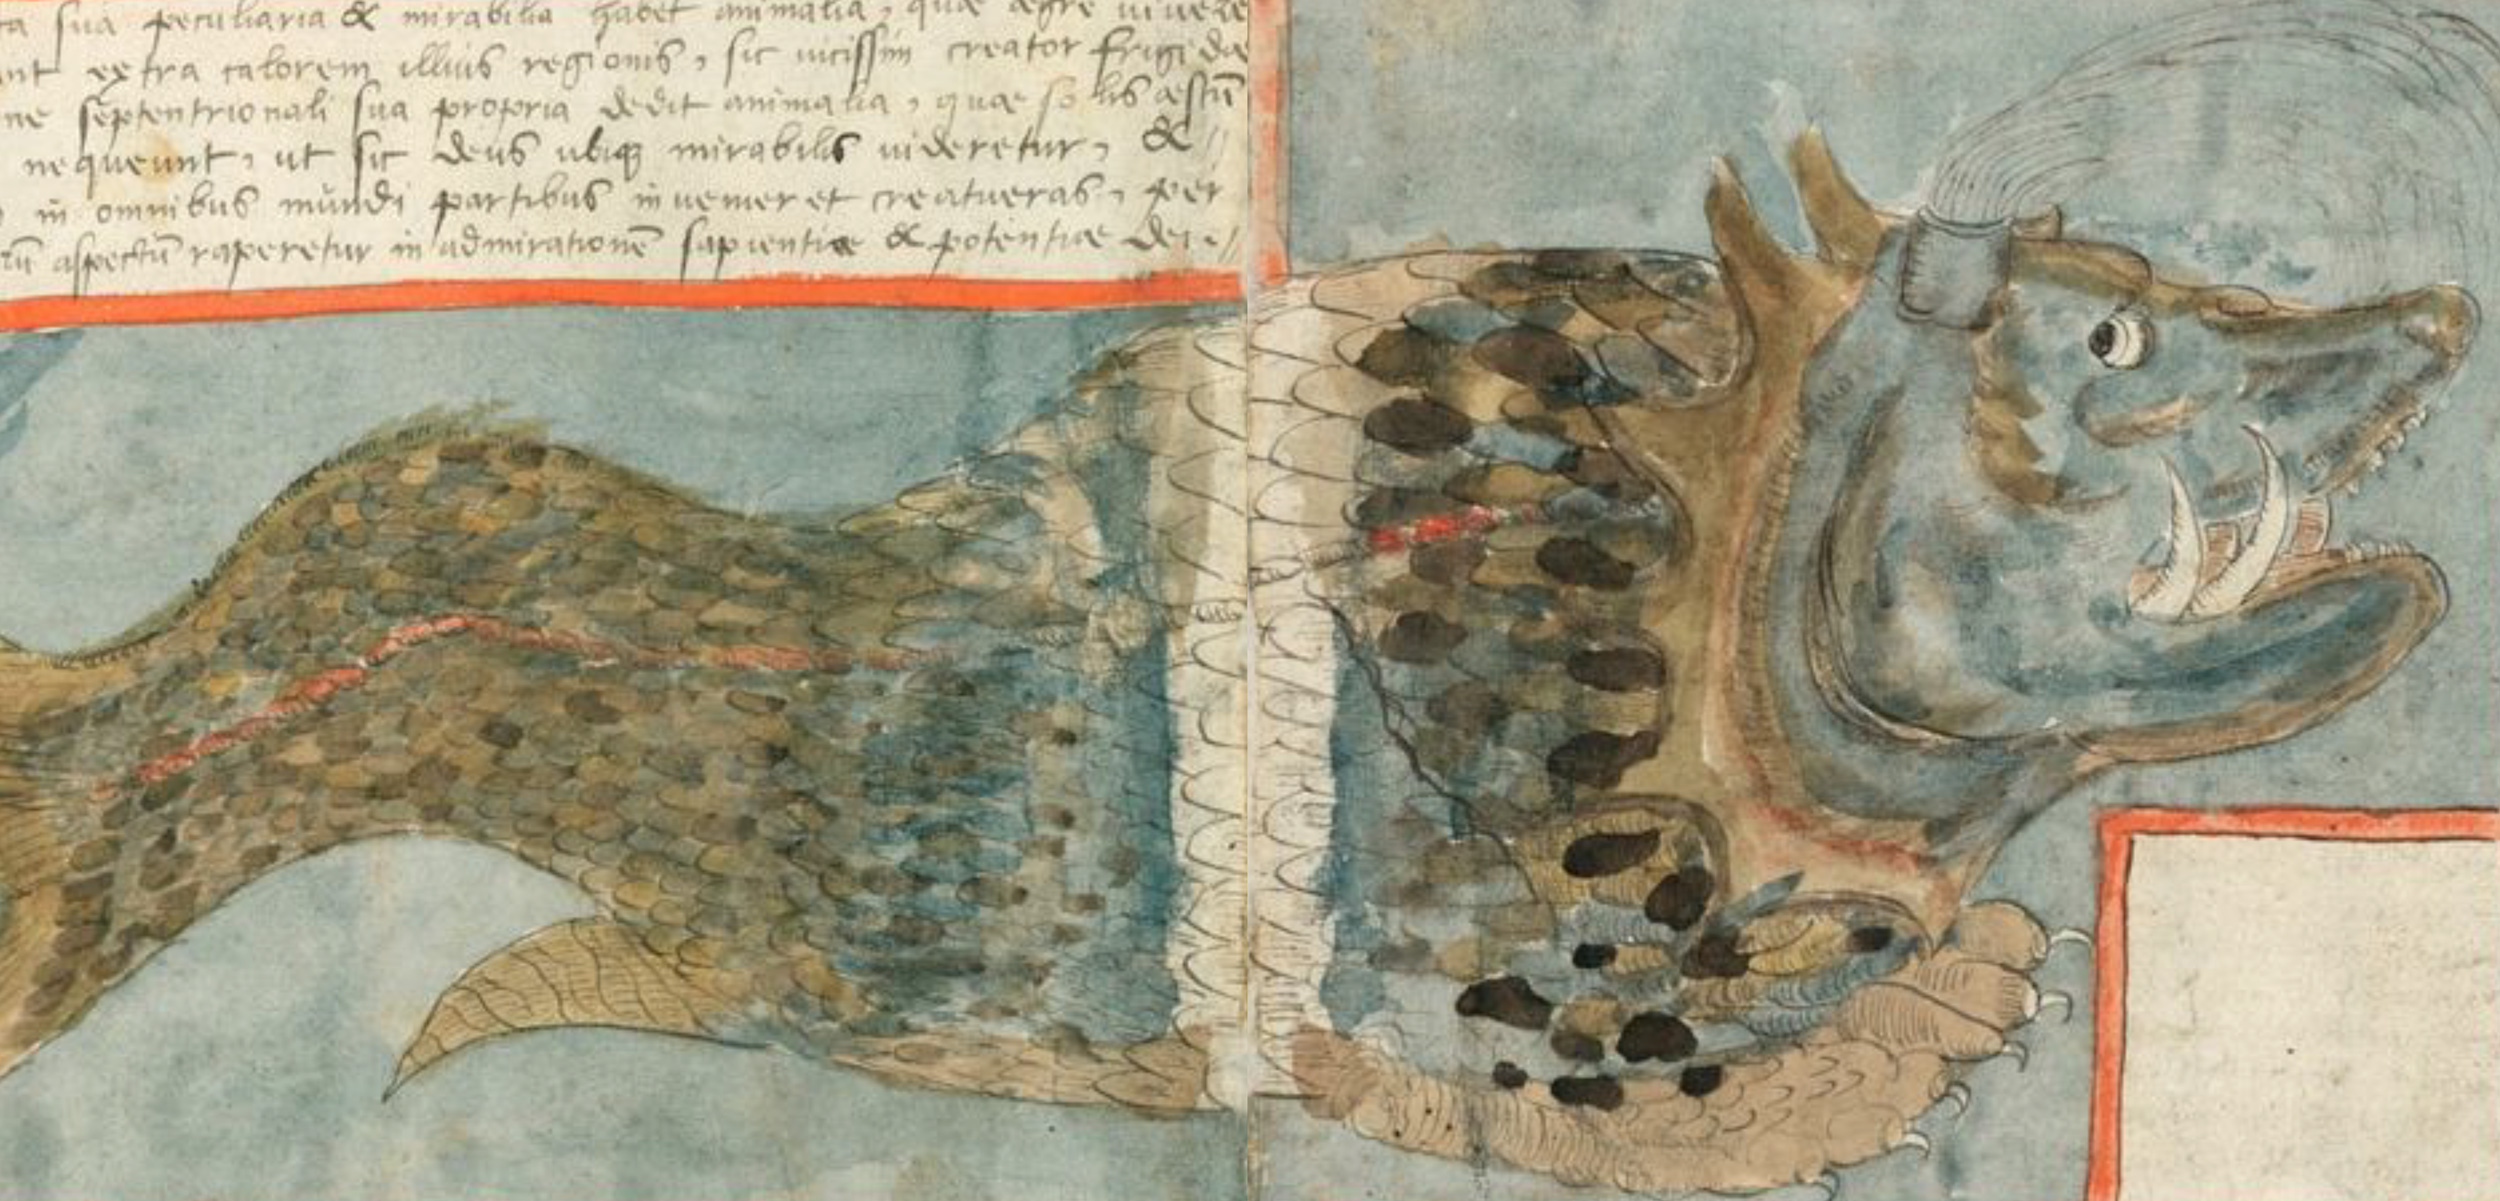 This denizen of the deep is just one of the spectacular watercolor paintings found in Adriaen Coenen’s 16th-century Visboek (Fish Book). Photo courtesy of World Digital Library